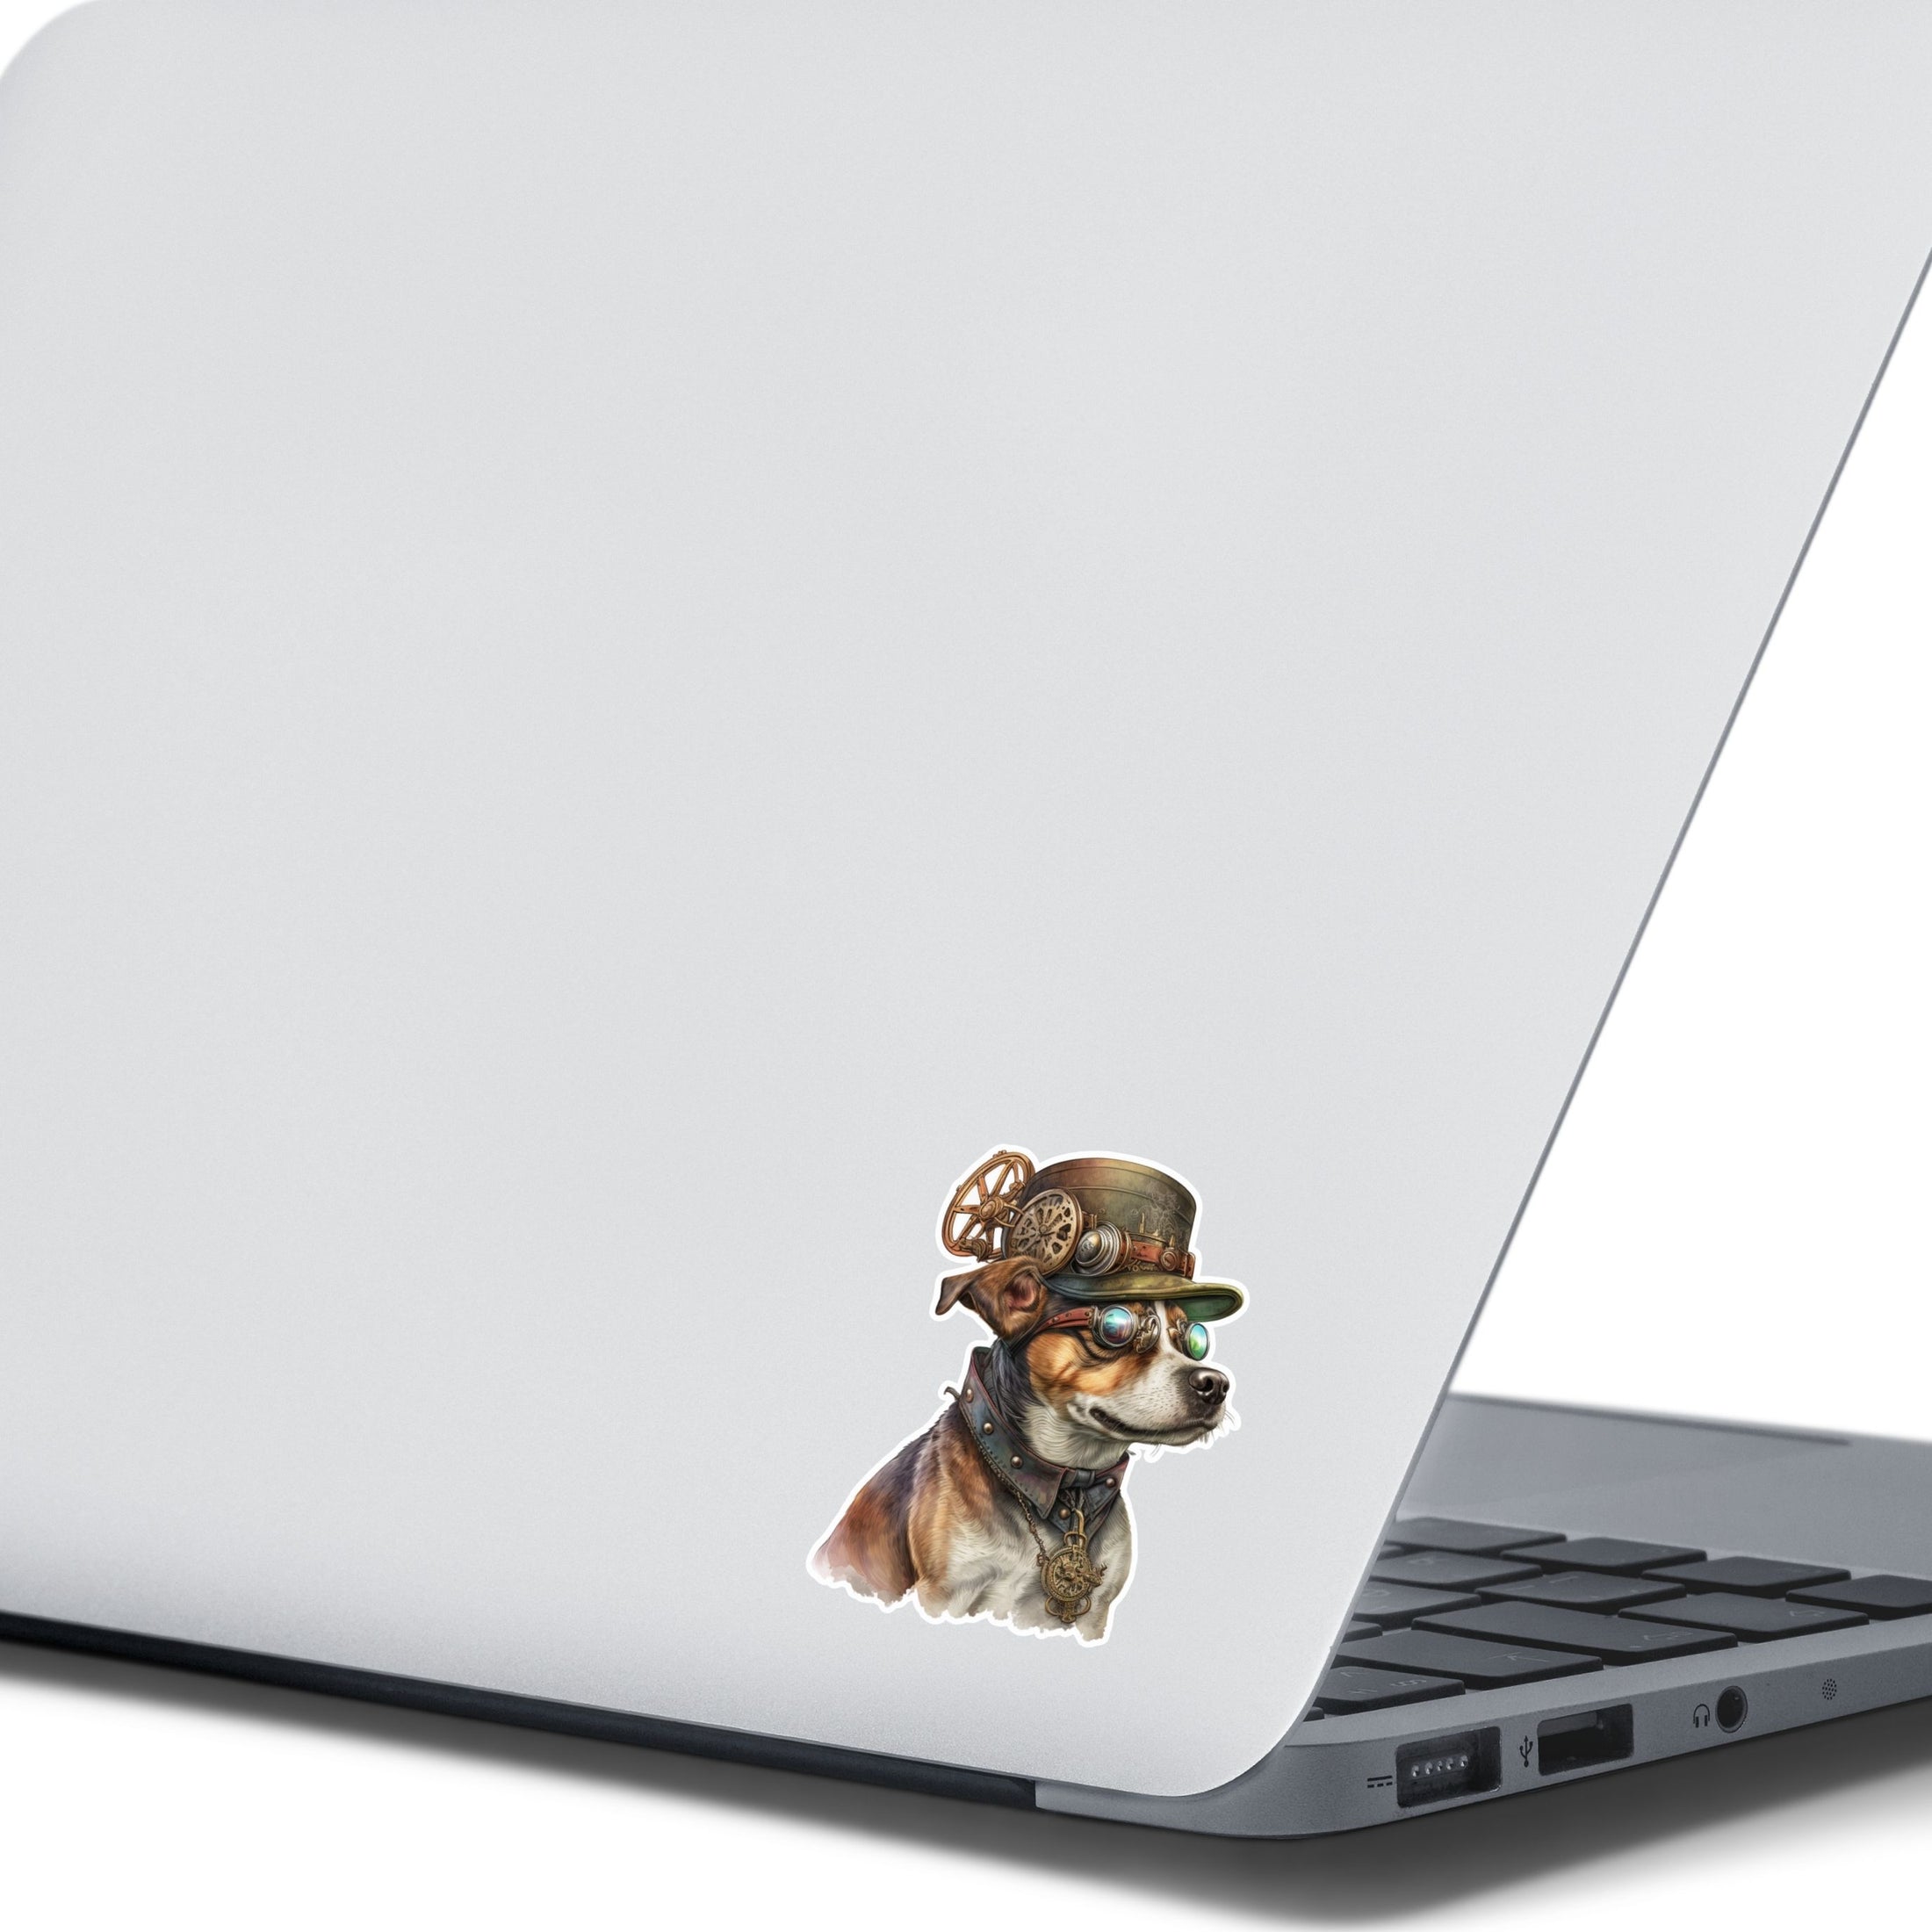 This image shows the steampunk dog sticker on the back of an open laptop.